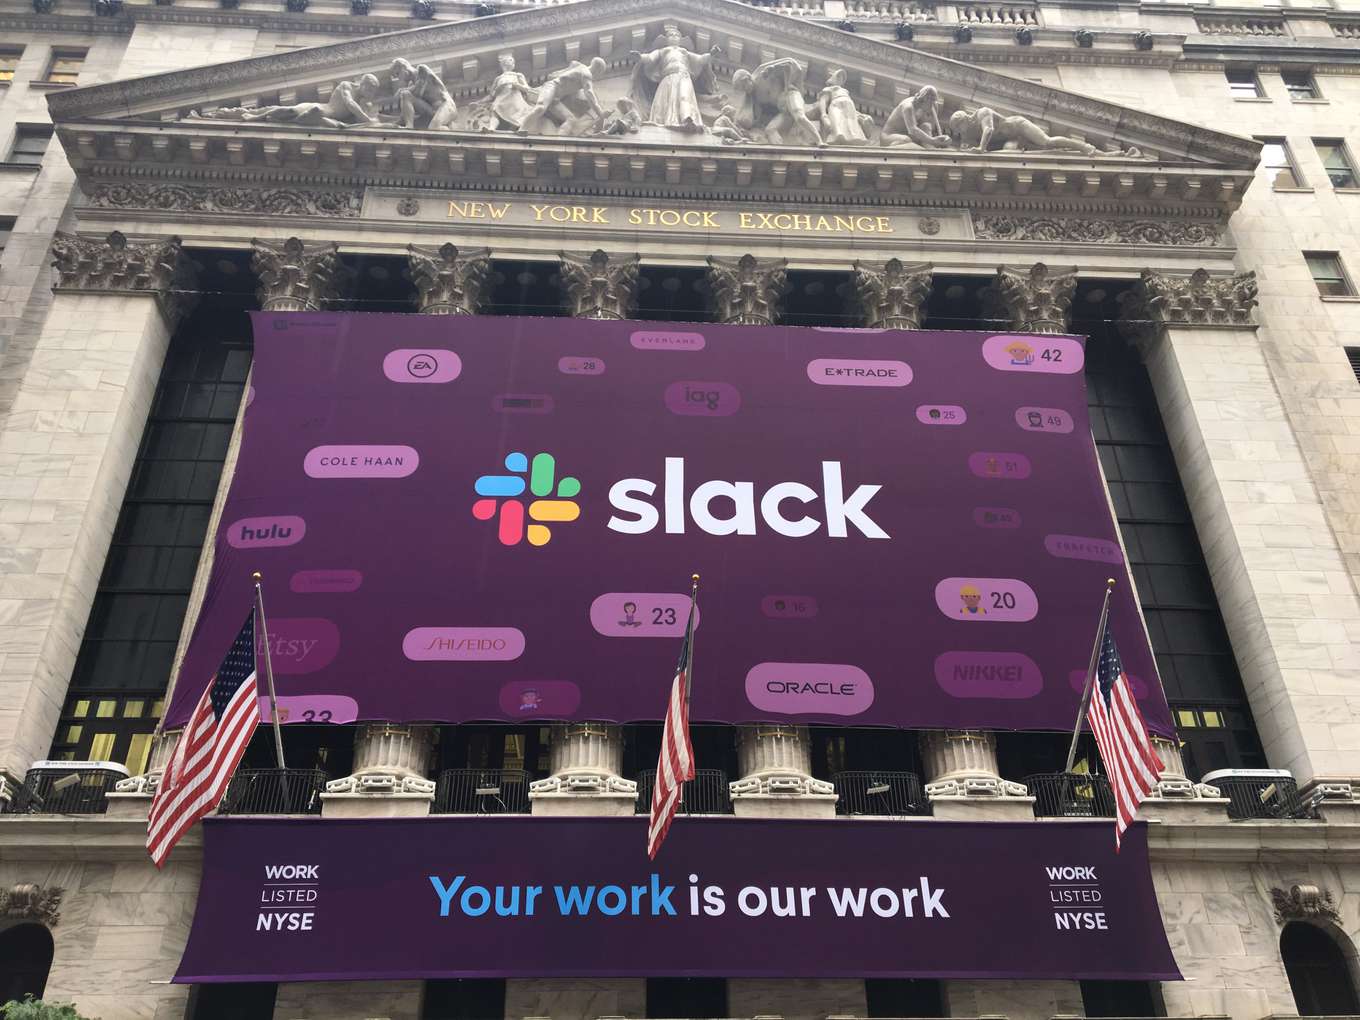 Slack: What You Need To Know About The Slack IPO